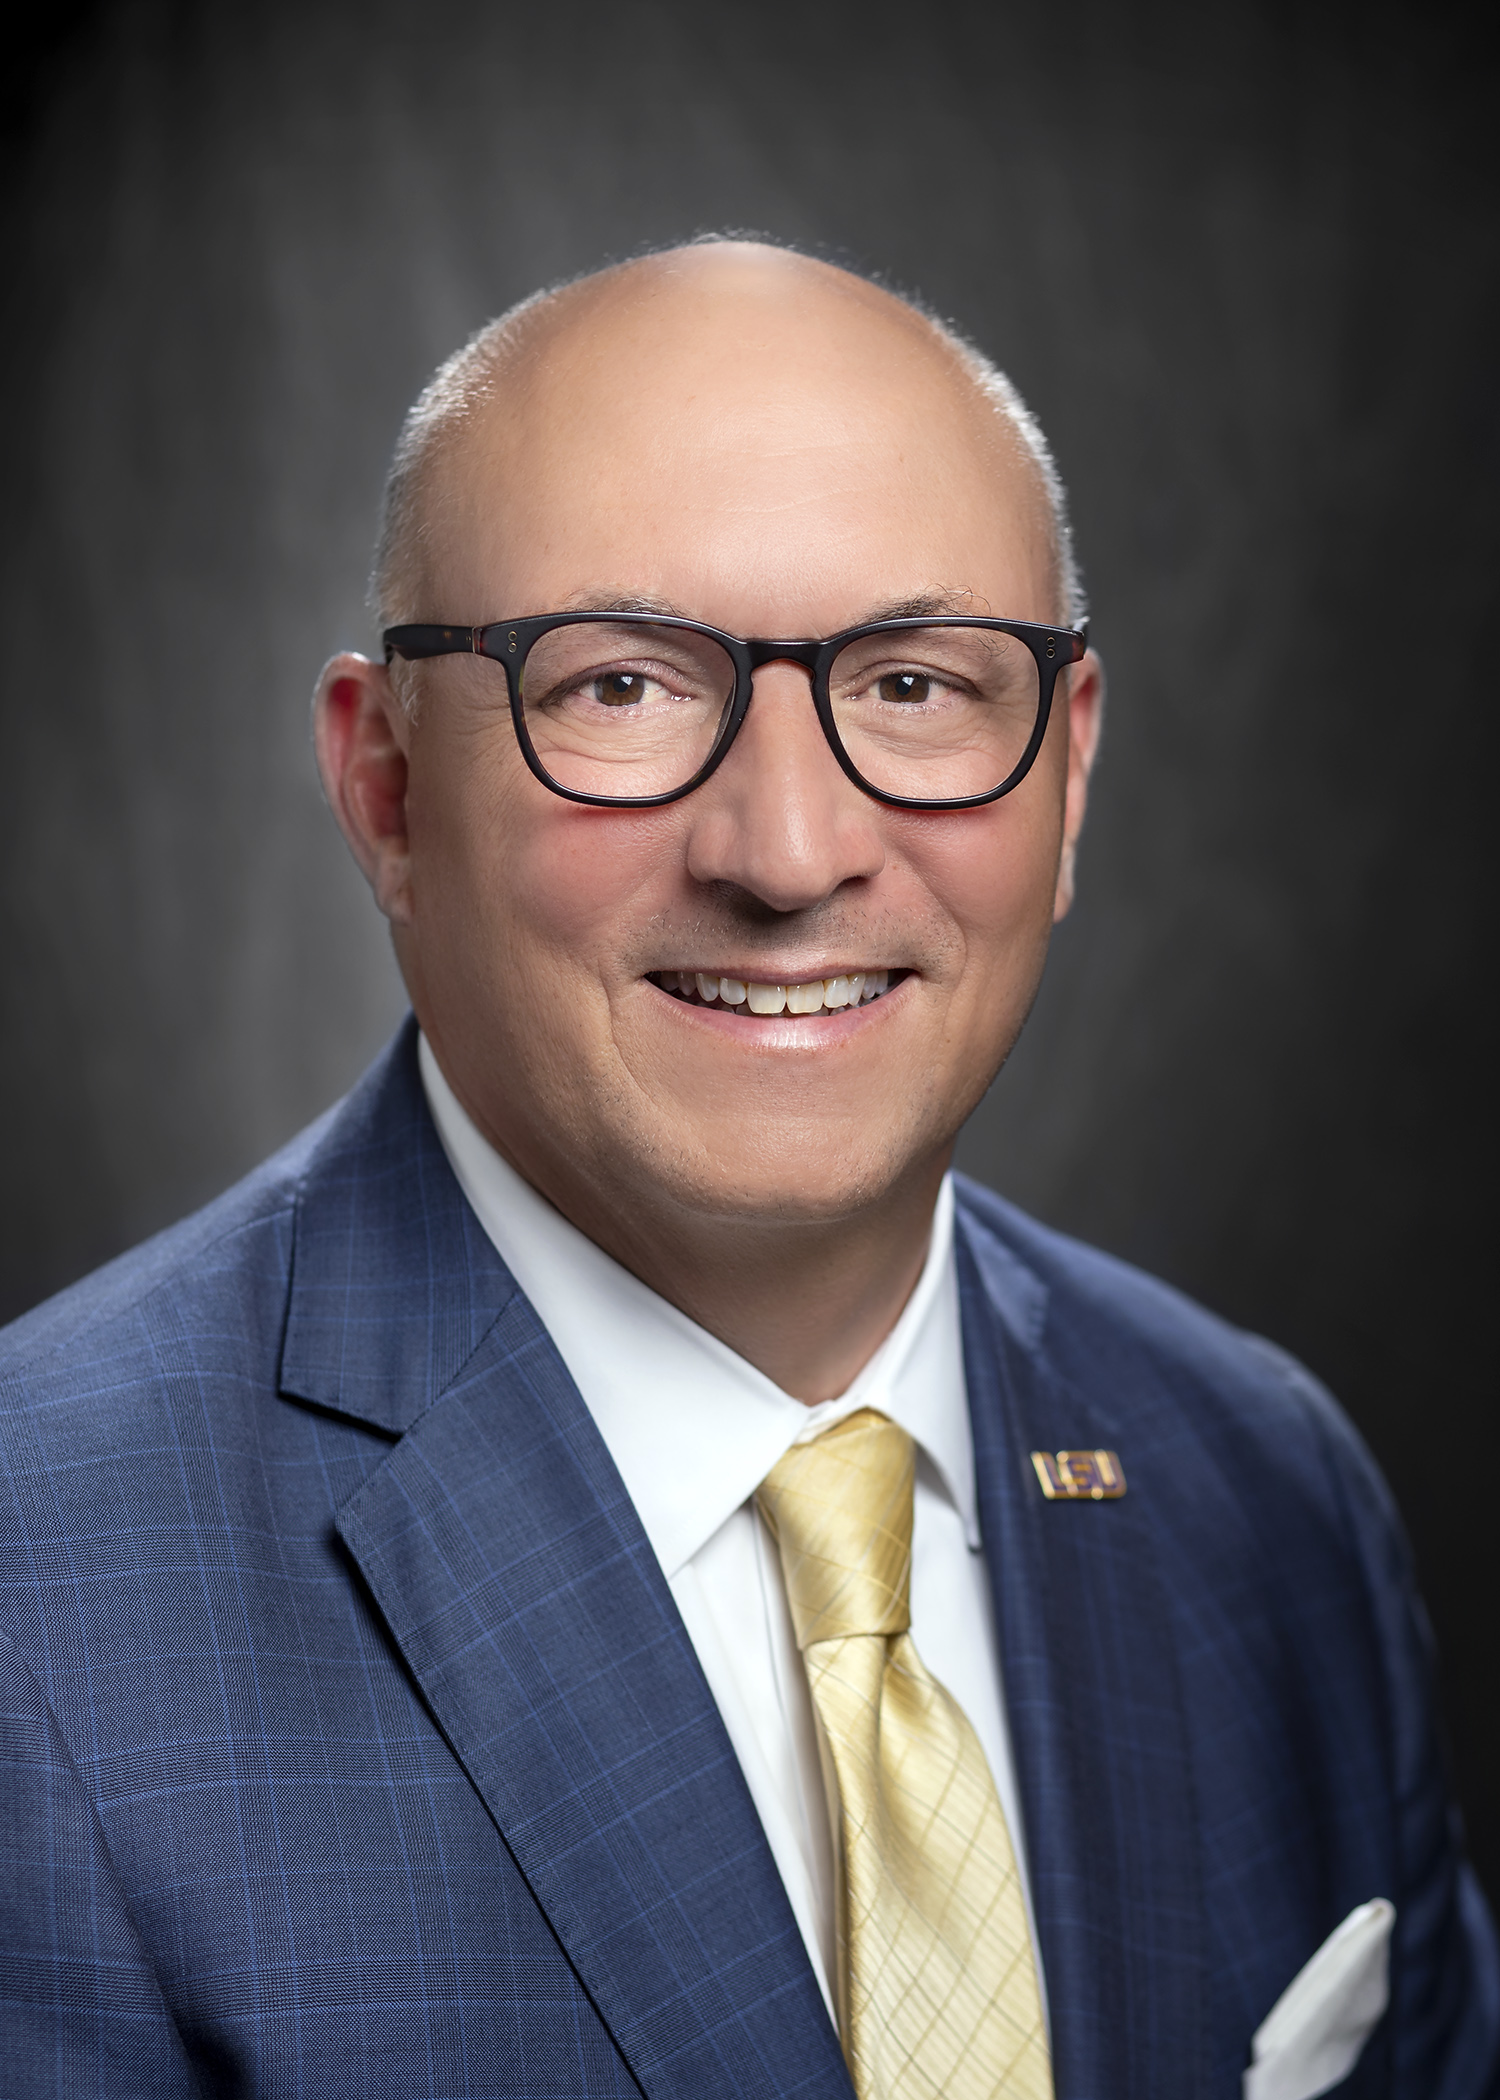 LSU Names Matt Lee Vice President for Agriculture and Dean of the College of Agriculture